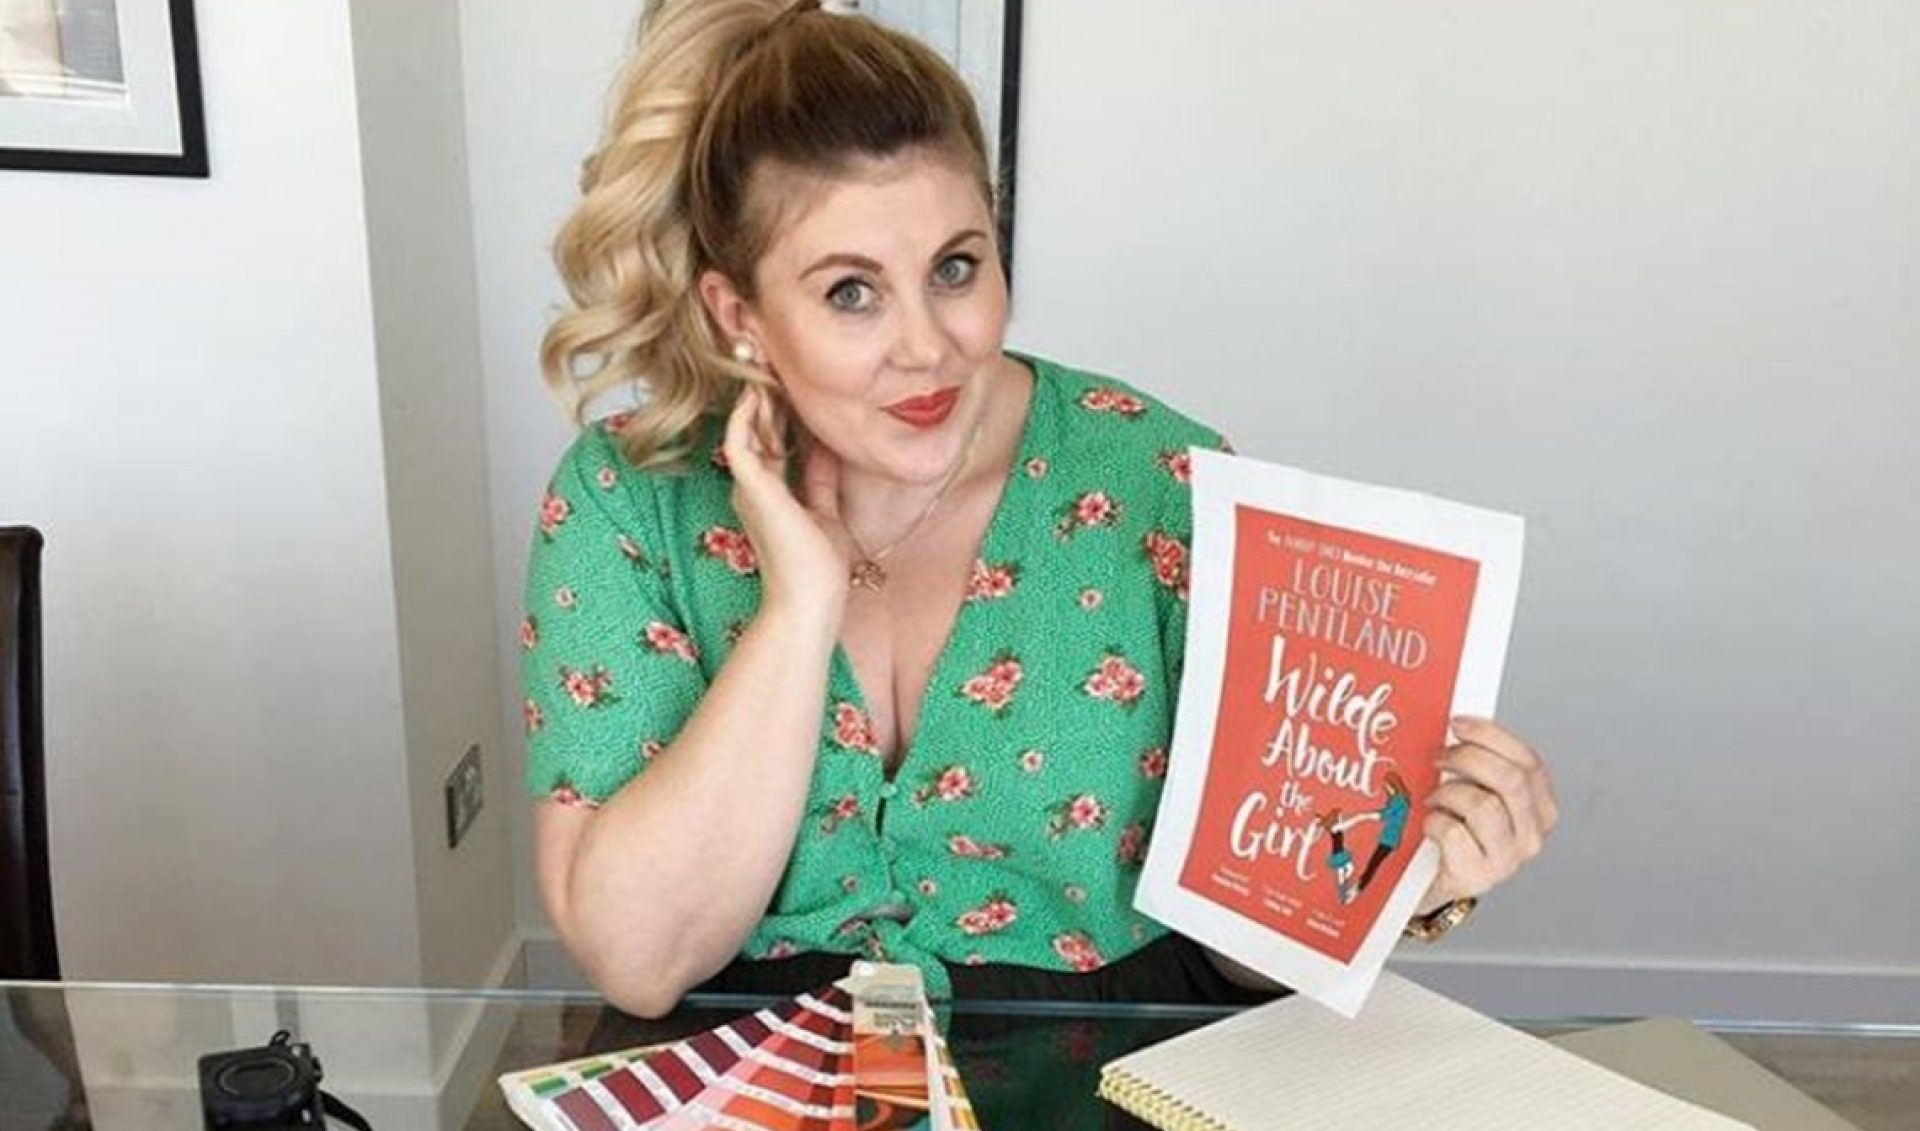 Louise Pentland To Release ‘Wilde About The Girl’, A Sequel To Her Best-Selling Novel